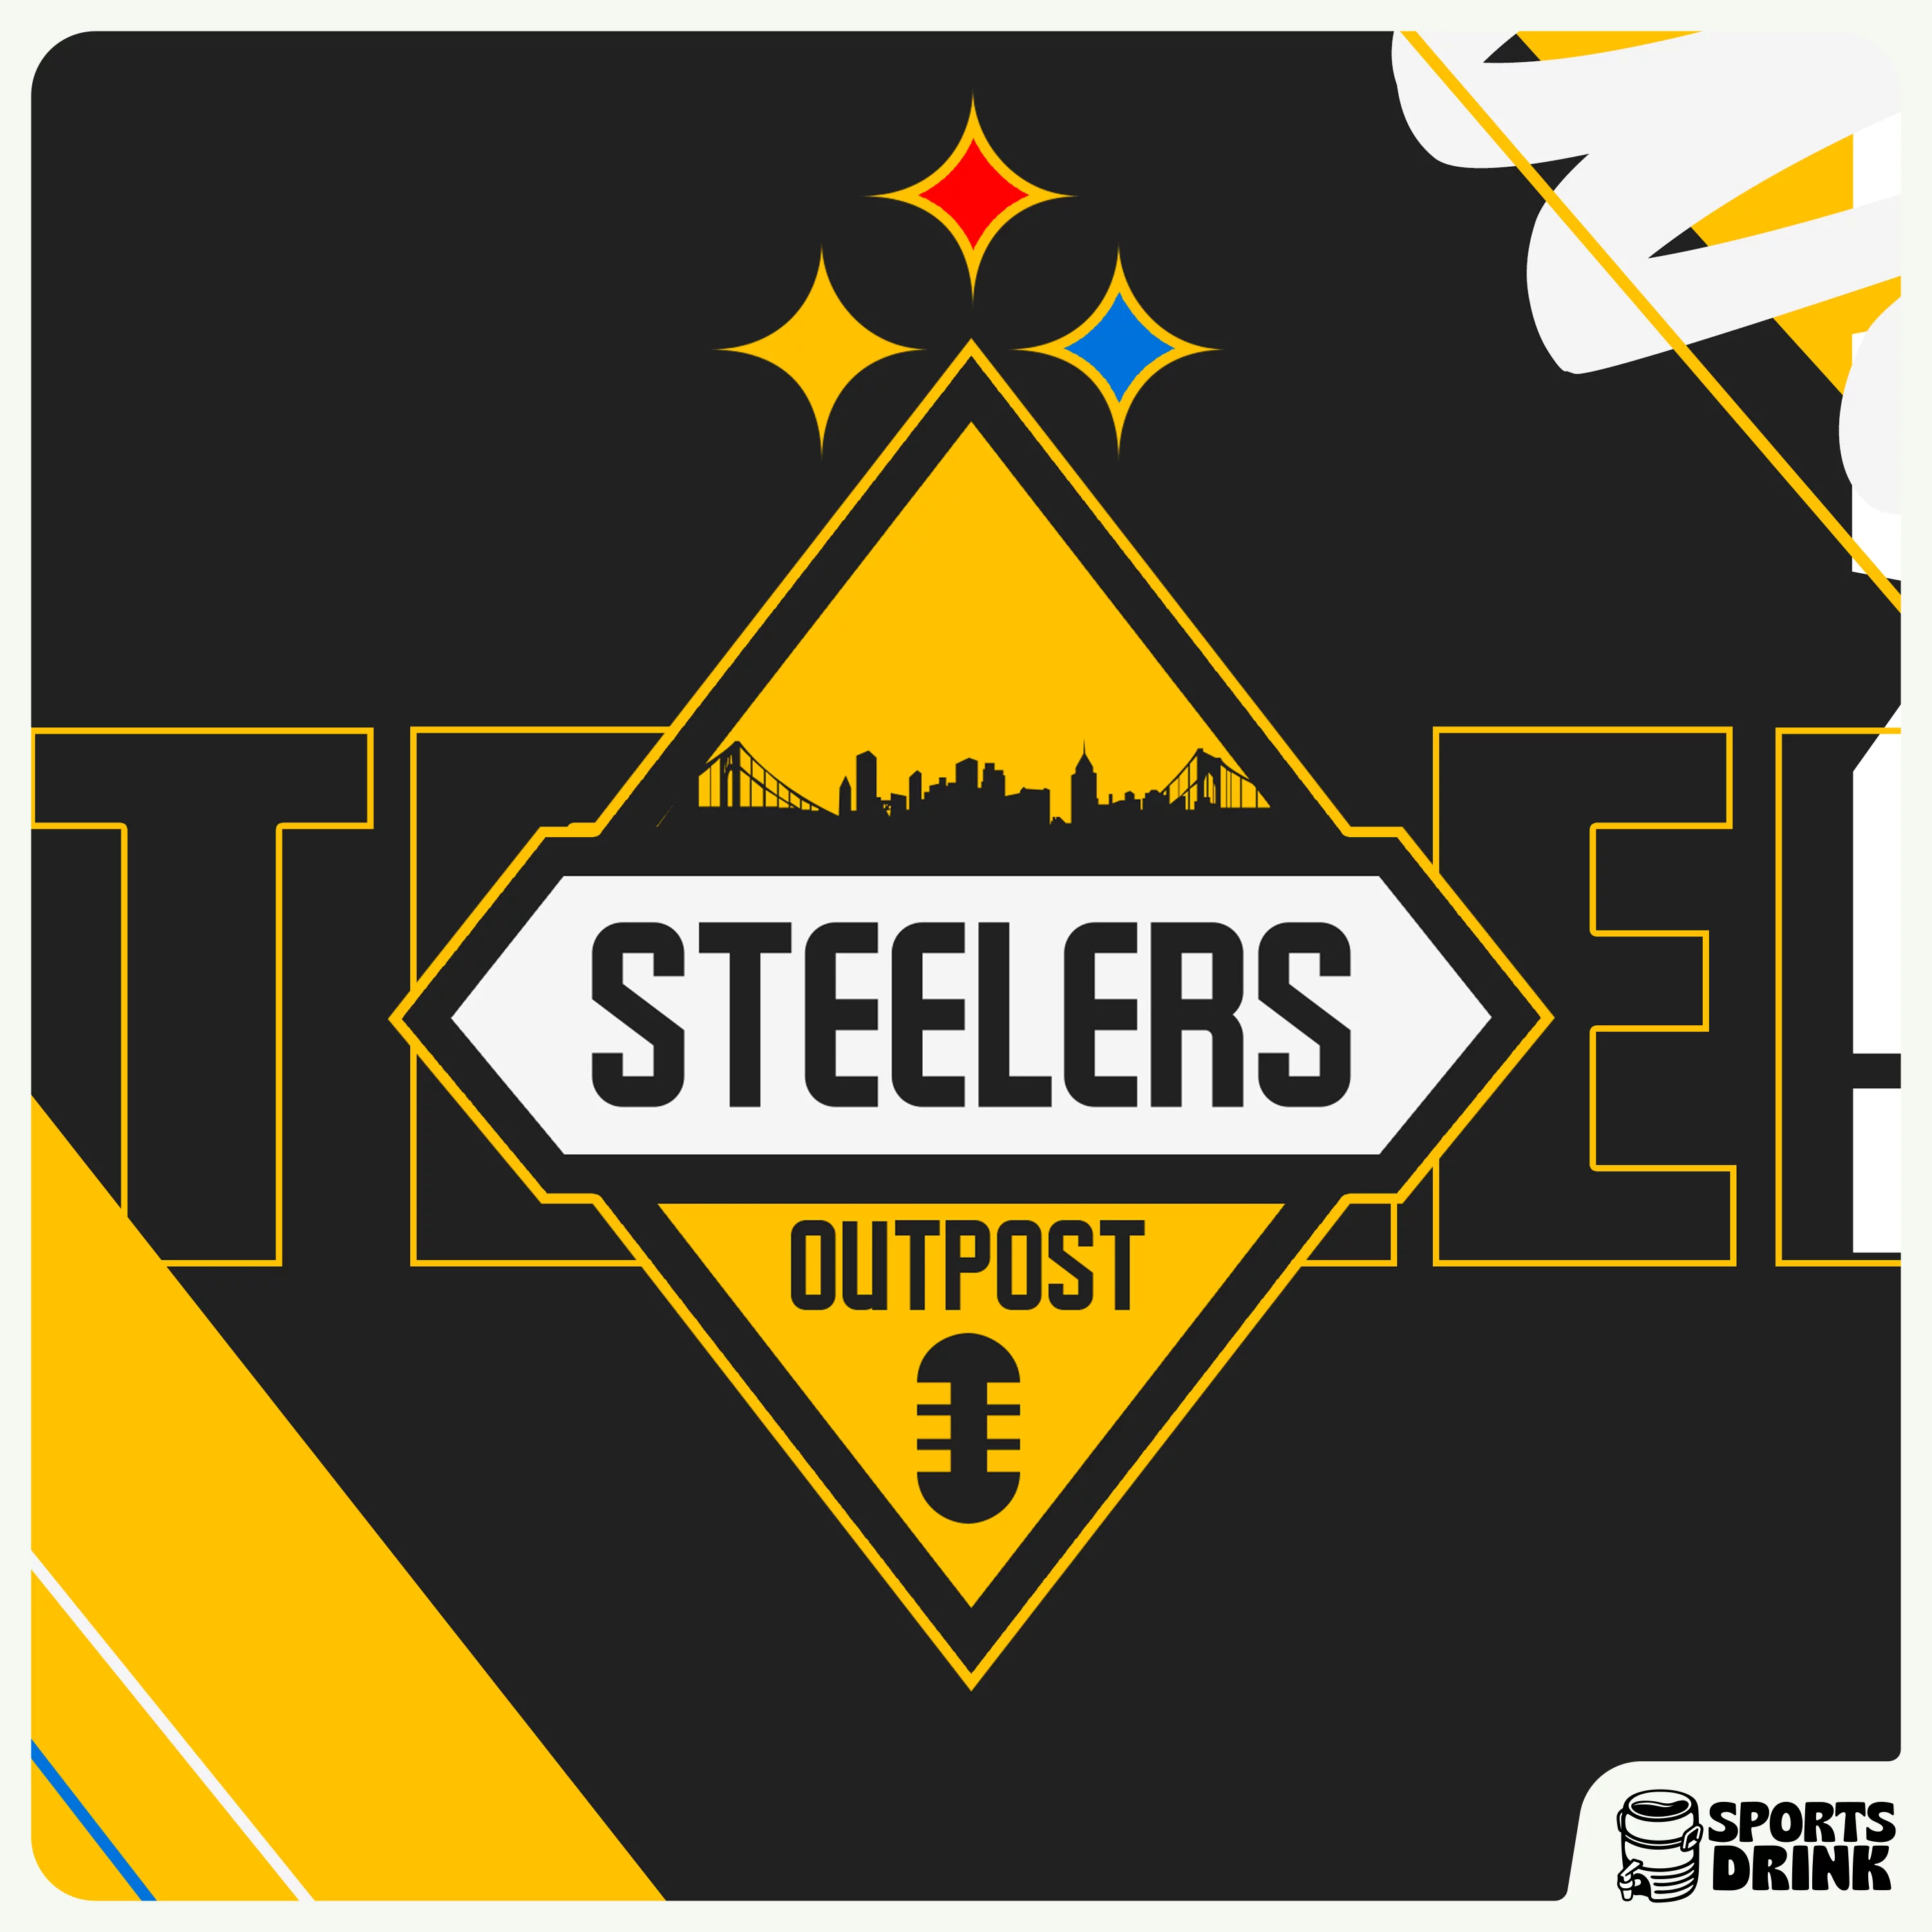 Steelers Outpost